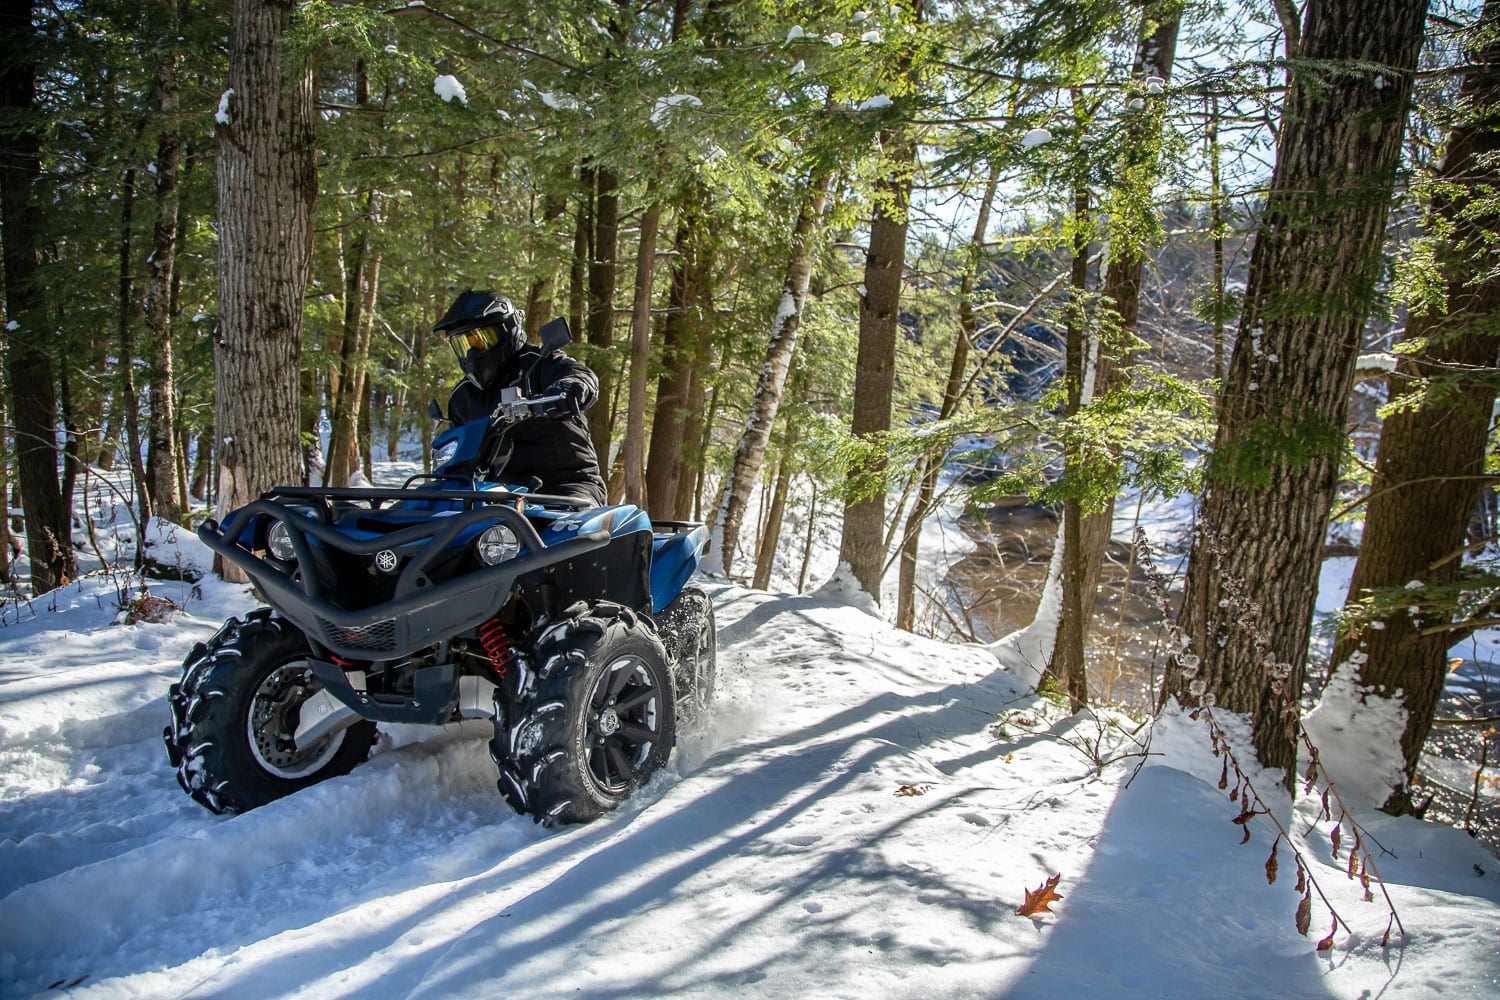 2019 Yamaha Grizzly SE Review